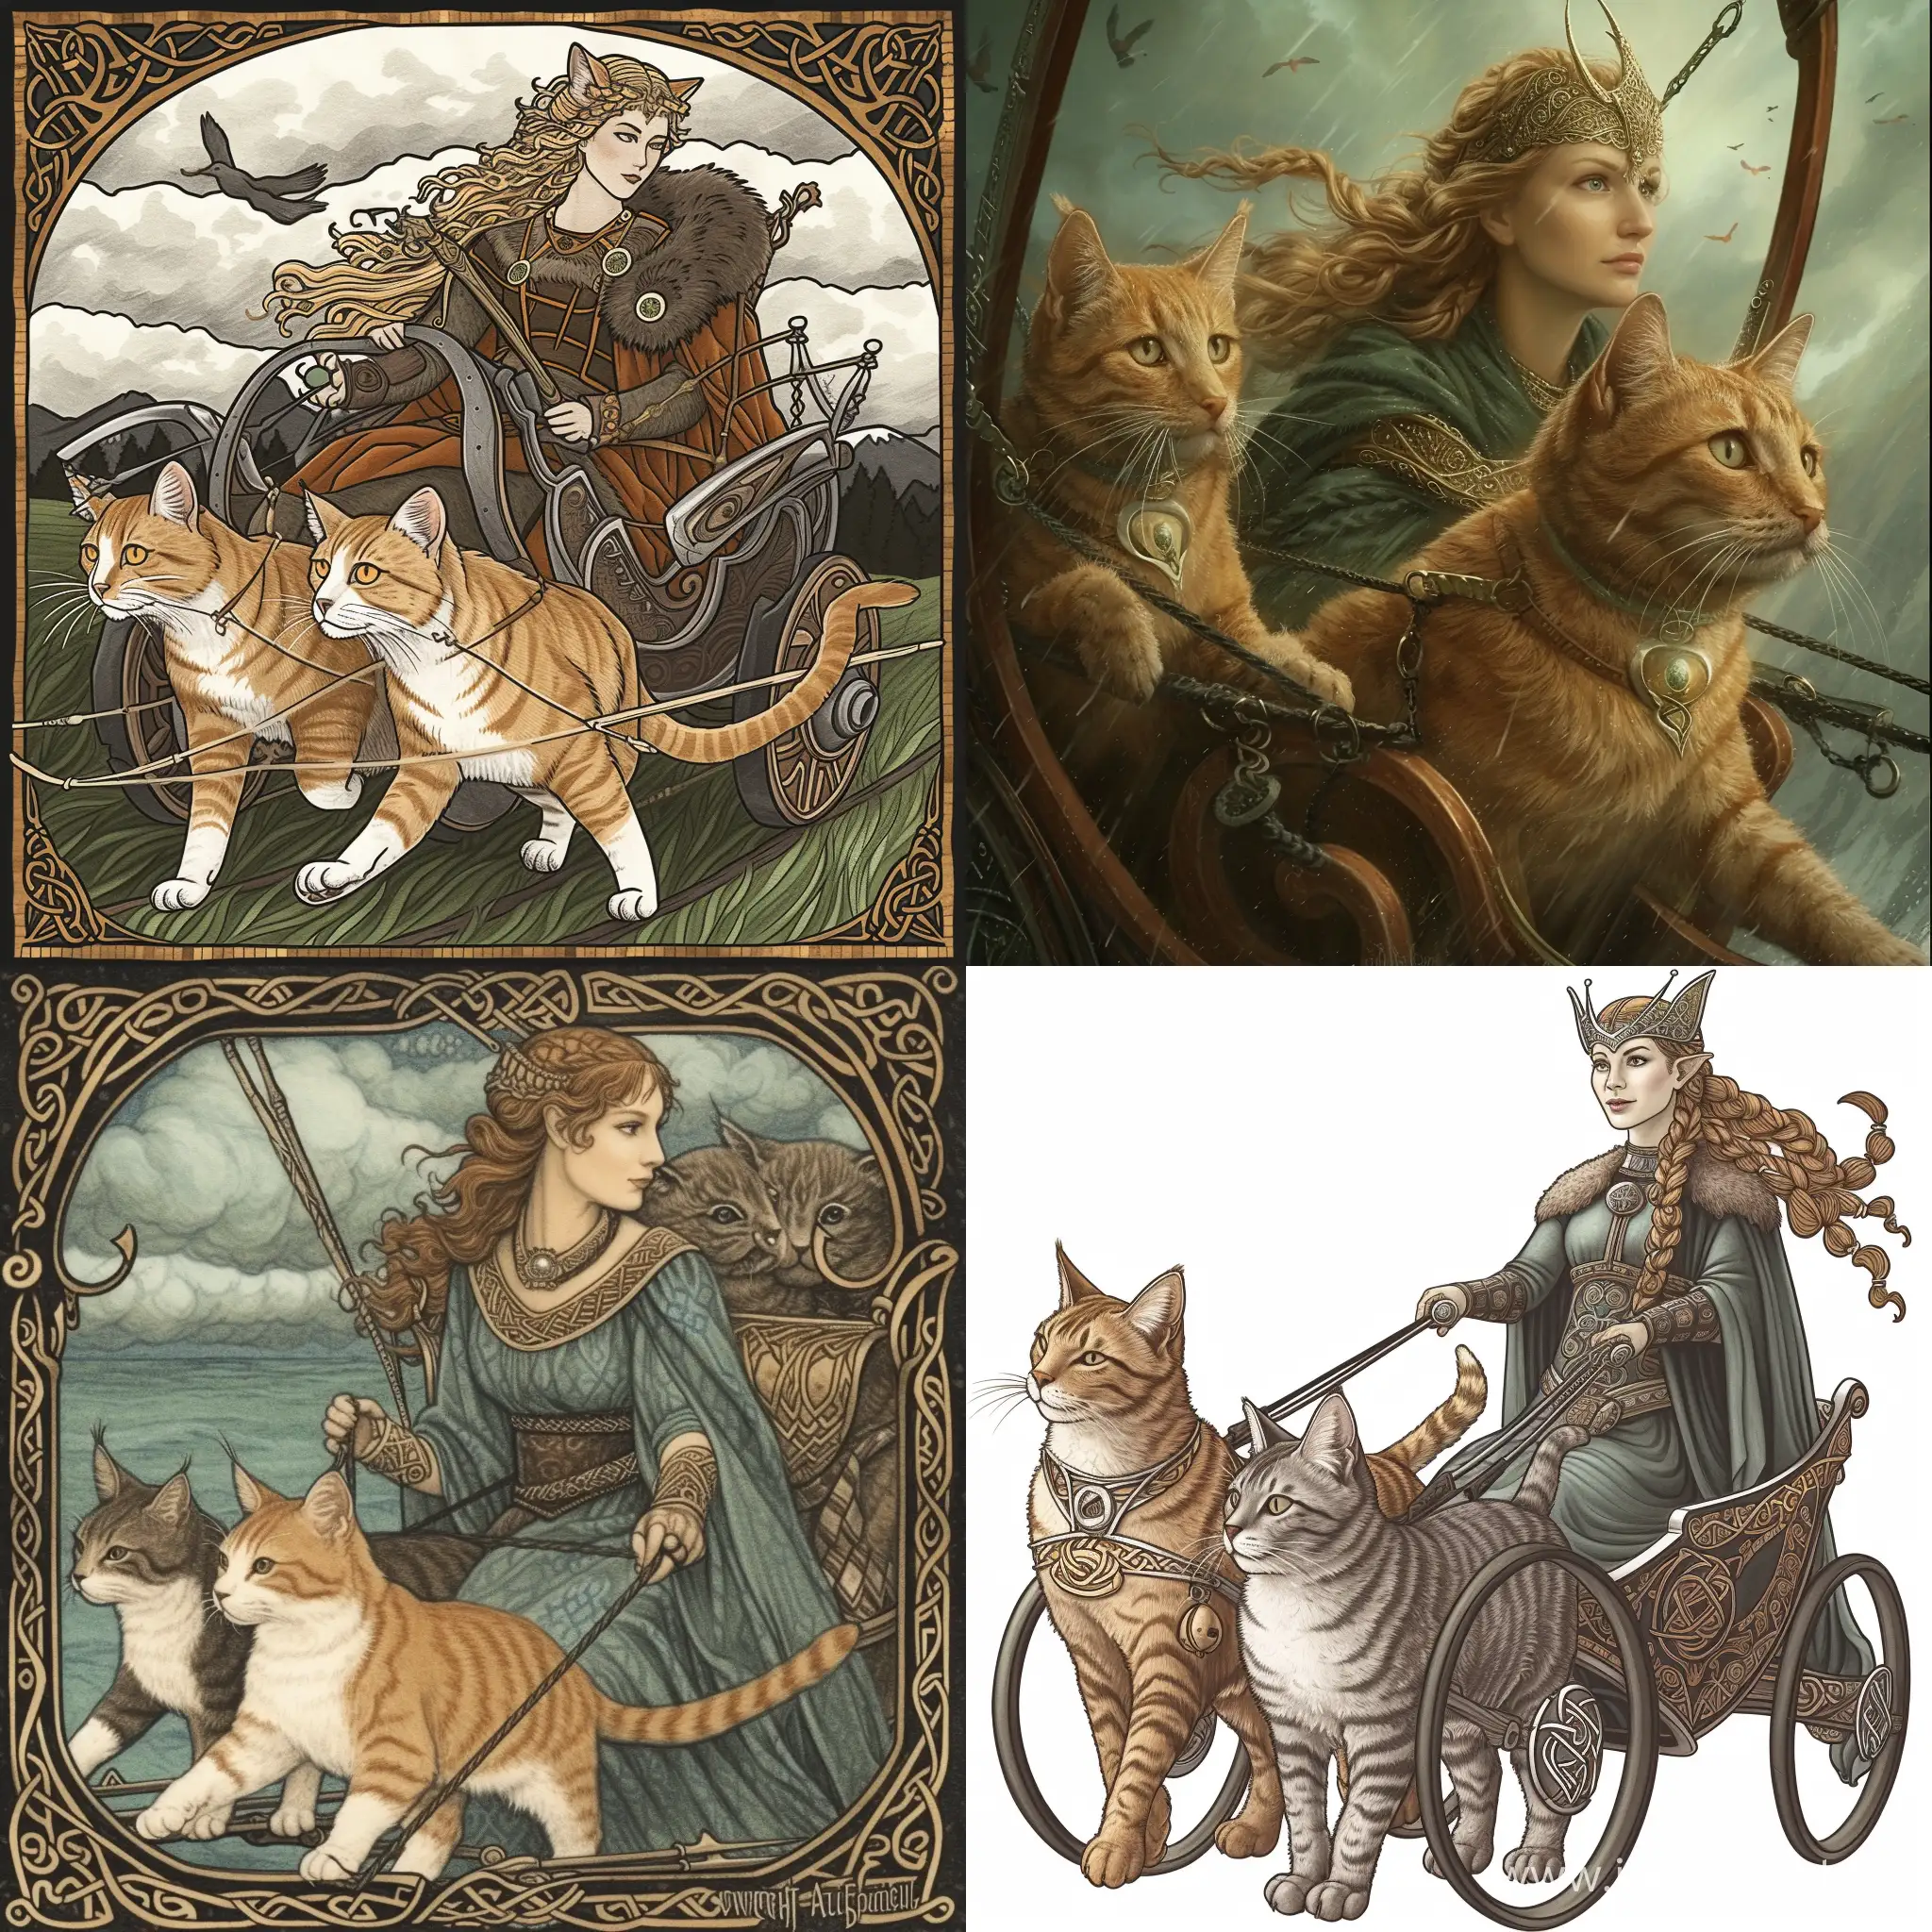 Freyja in Norse mythology is a goddess of love and beauty, she rides in a chariot pulled by two cats. 